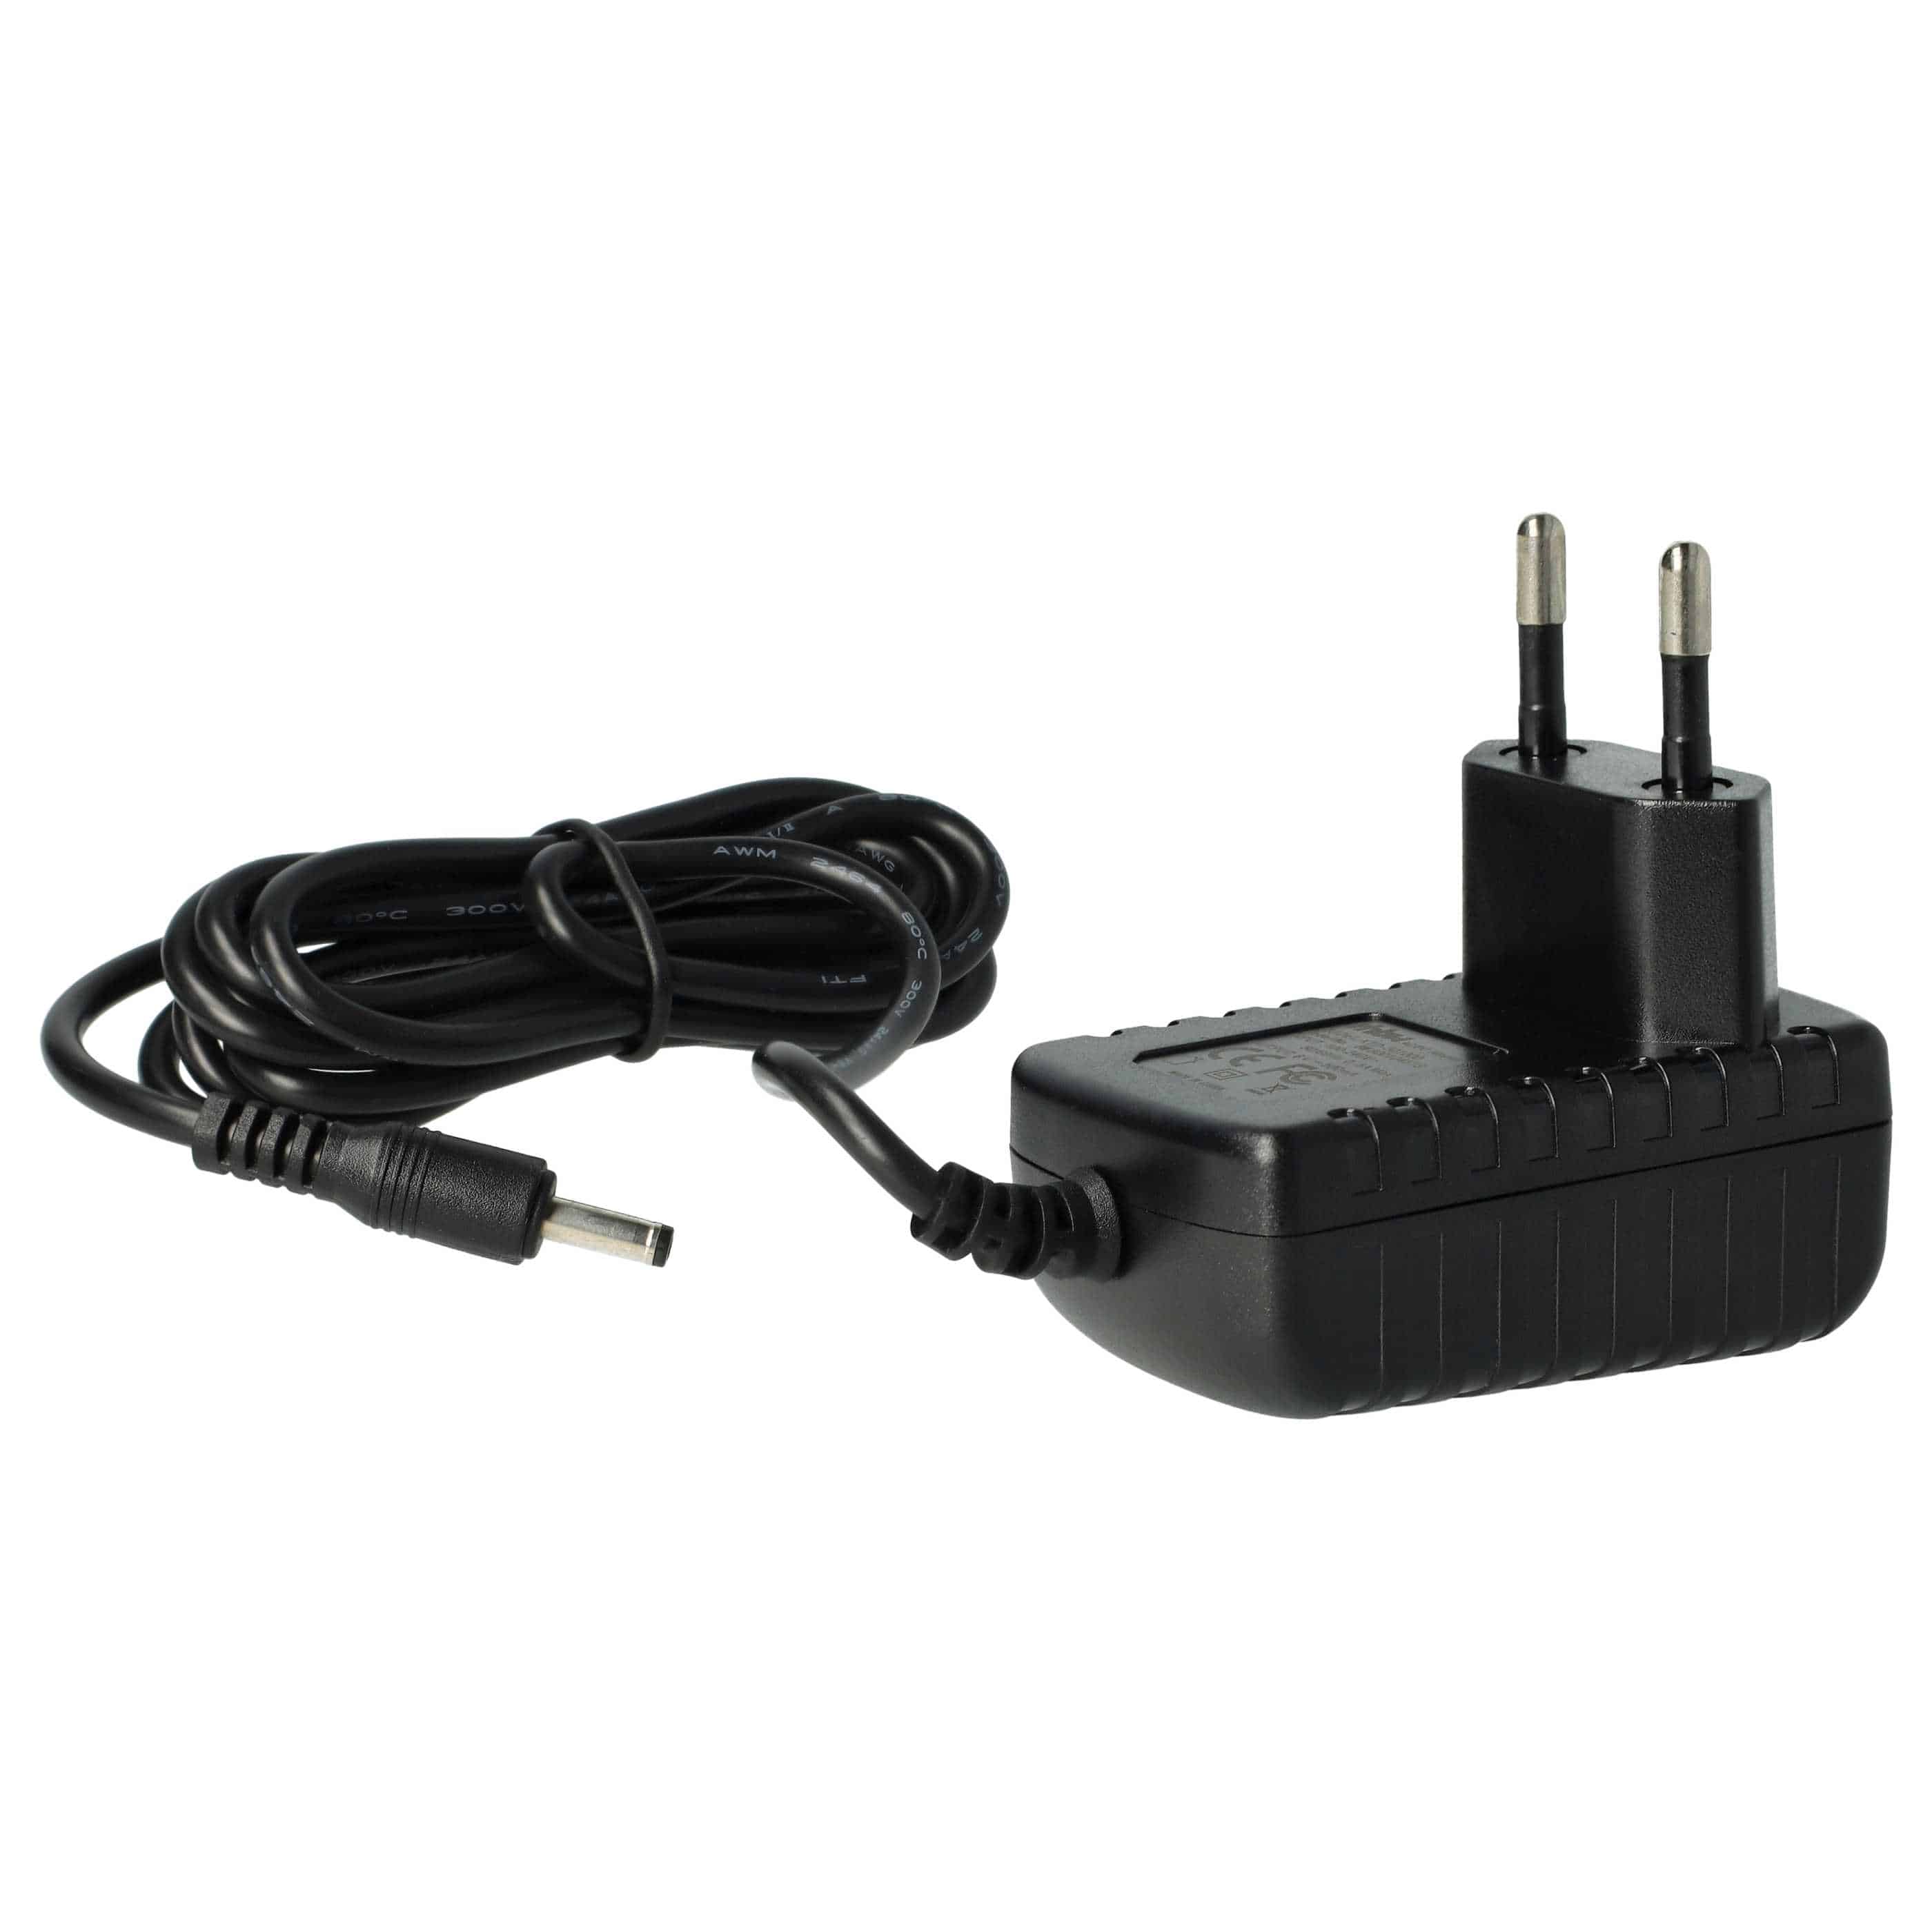 Mains Power Adapter replaces Philips ECL-PH3-PS for Landline Telephone Charging Station